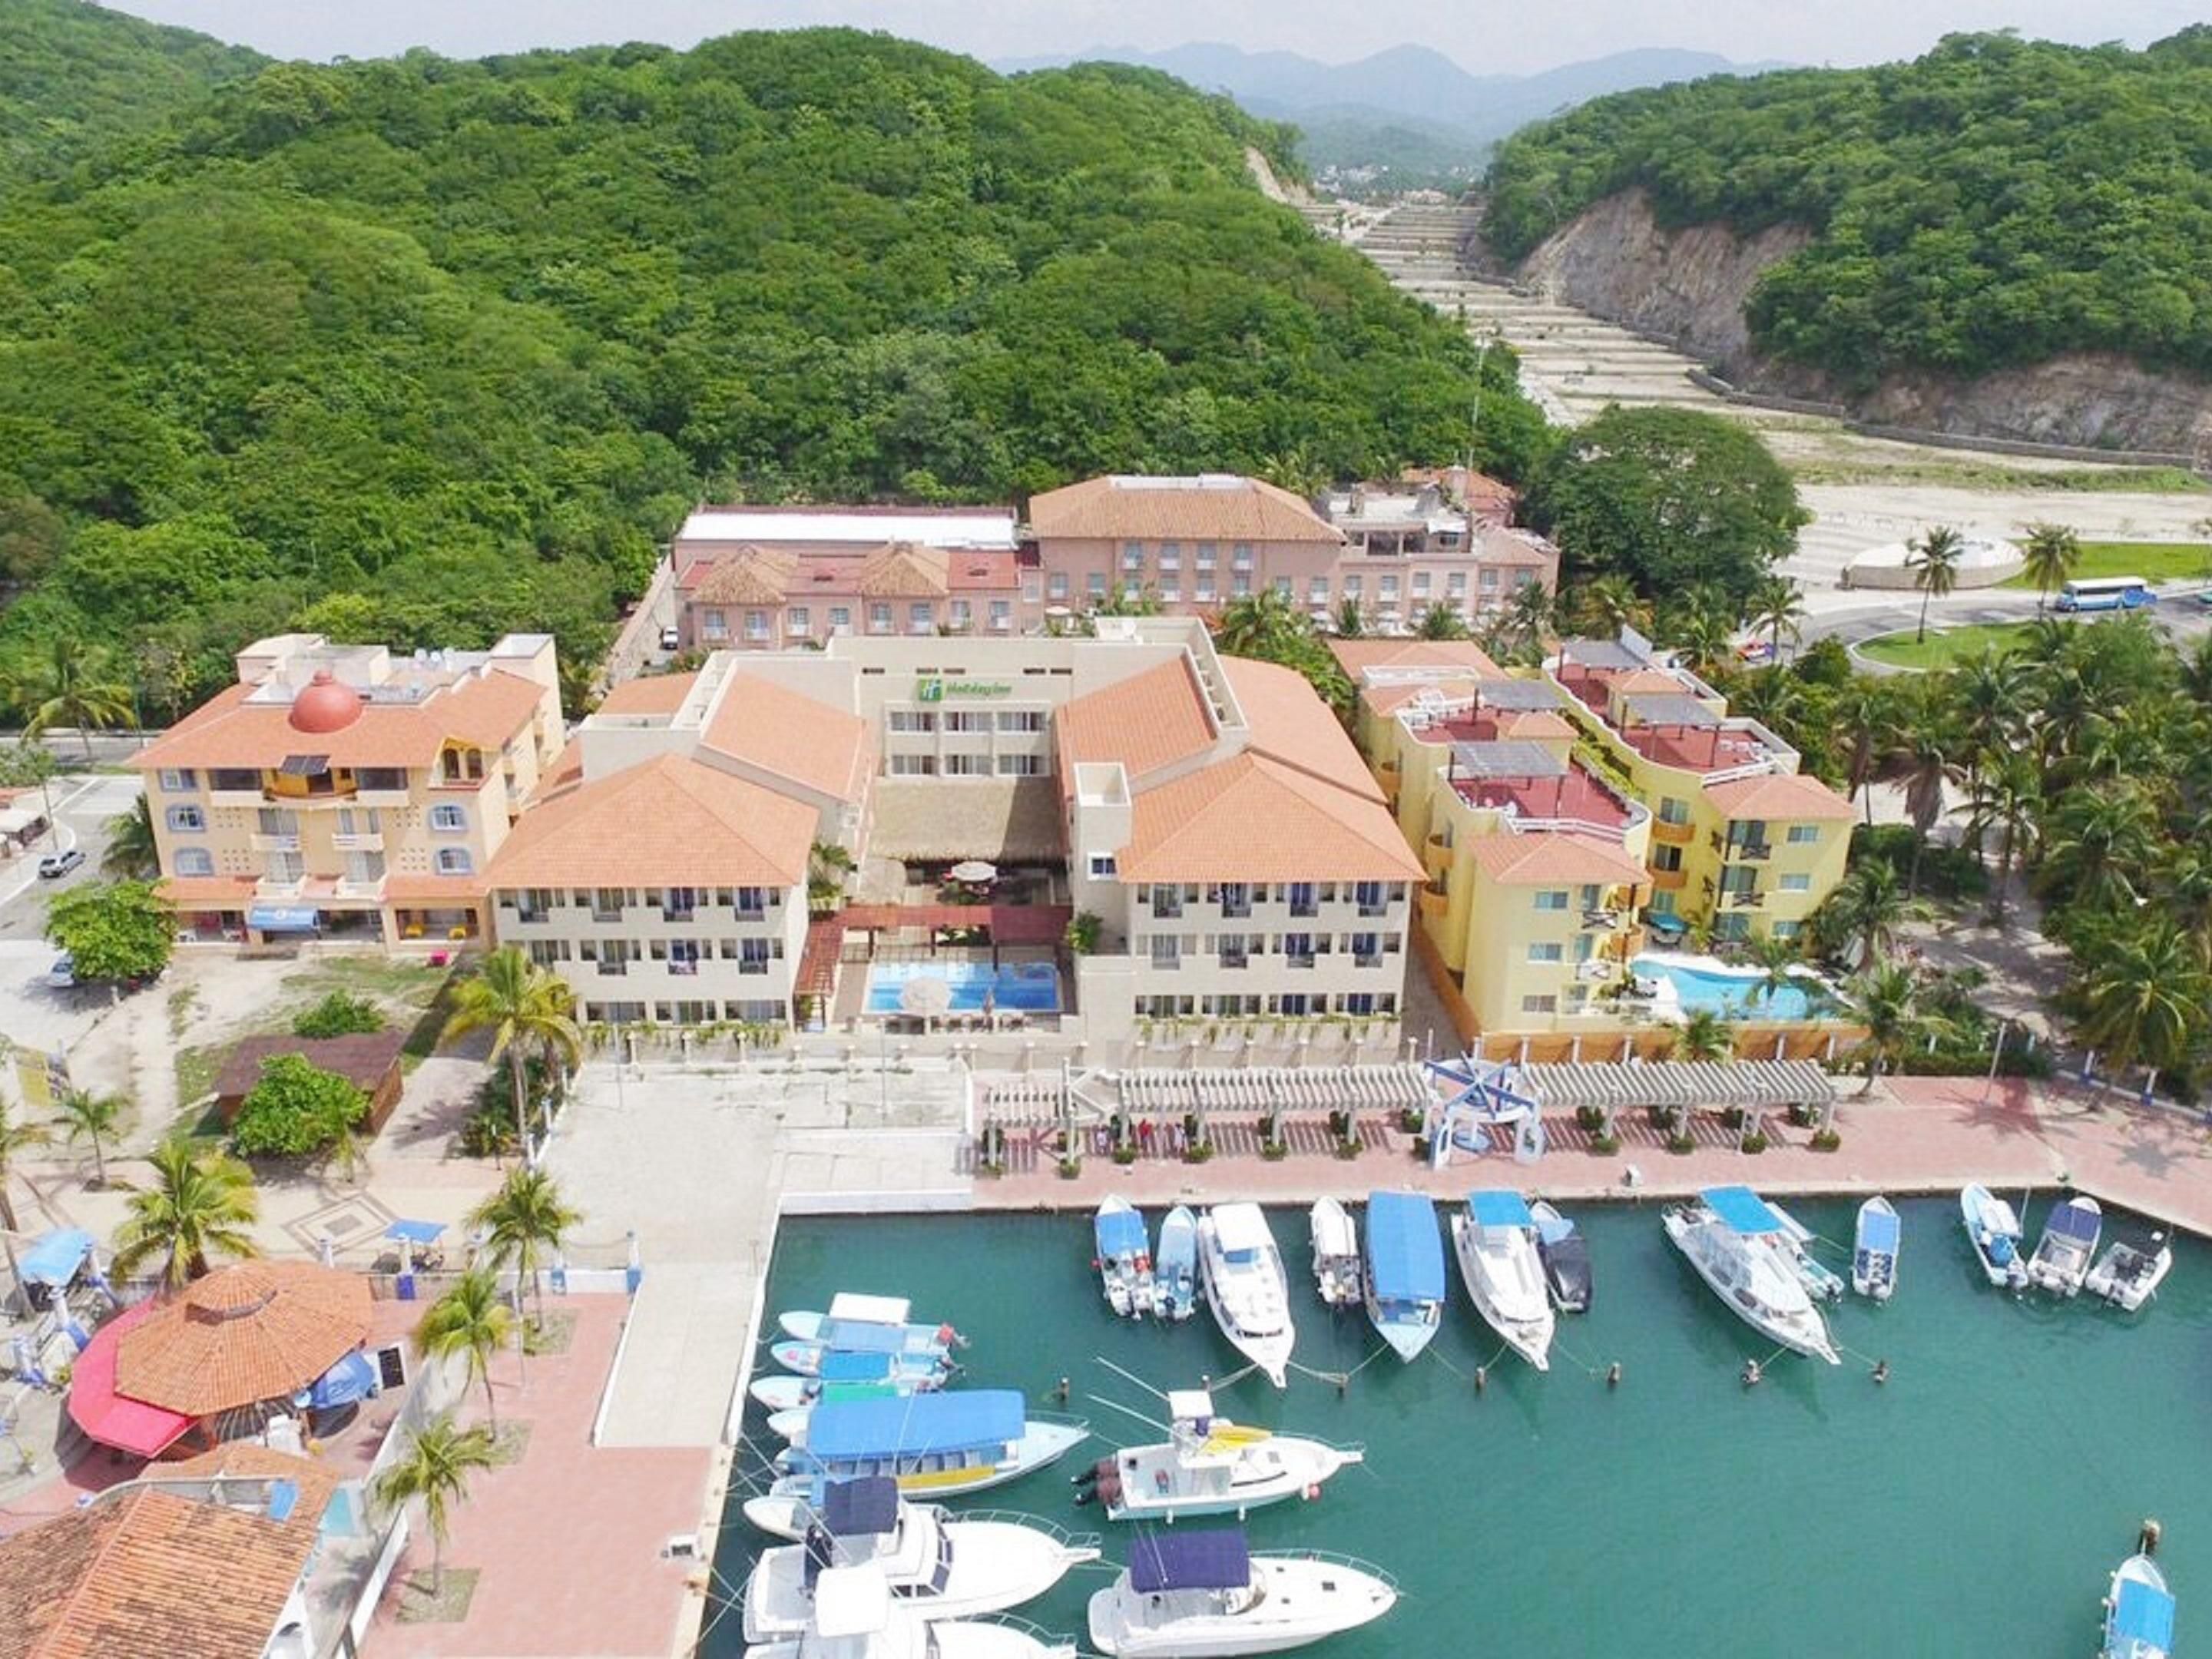 The hotel is located in a privileged area of ​​the of Santa Cruz's Bay with easy access to transportation, banks, craft market, beach and dock.